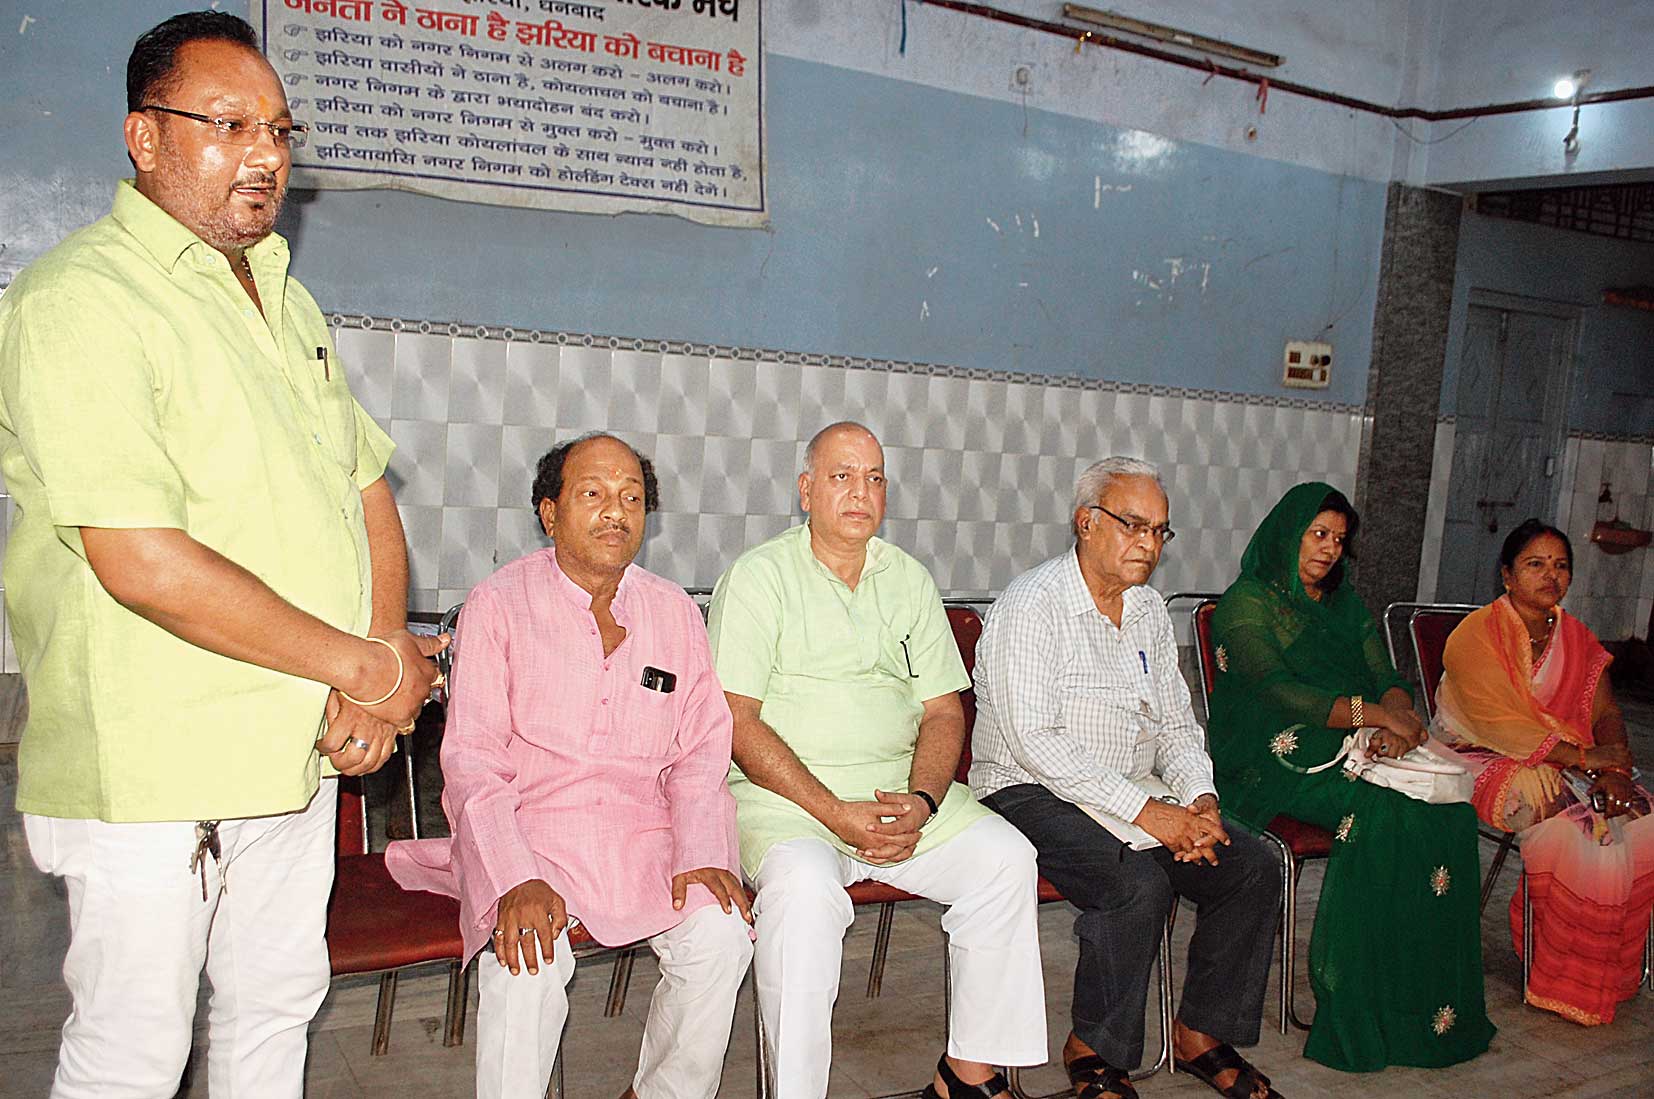 Members of social outfits at the meeting in Jharia, Dhanbad, on Thursday. 
